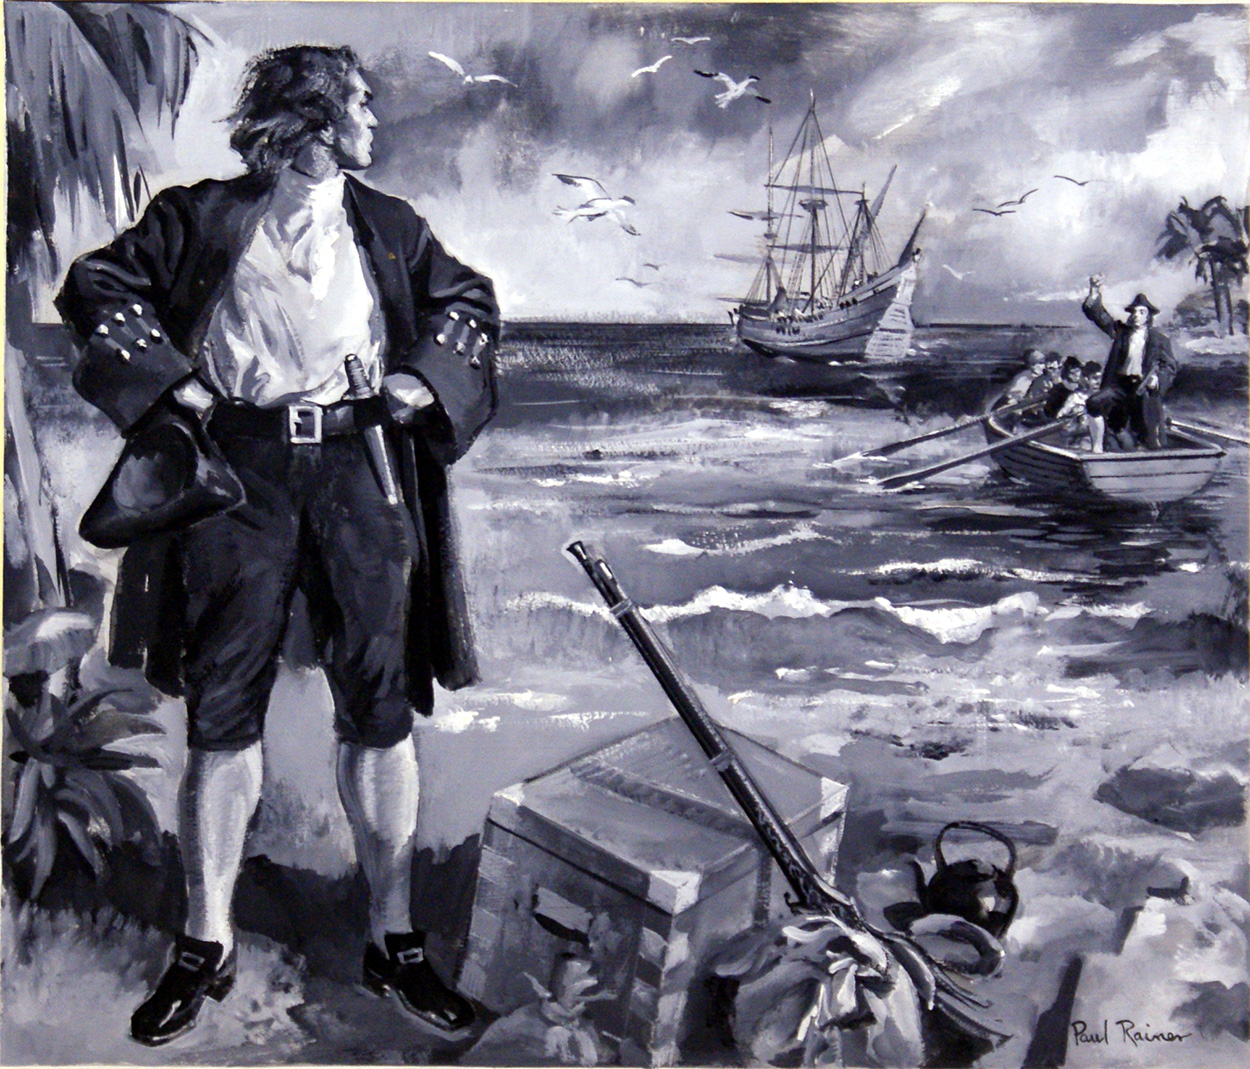 Alexander Selkirk: the Real Life Robinson Crusoe (Original) (Signed) art by Paul Rainer Art at The Illustration Art Gallery